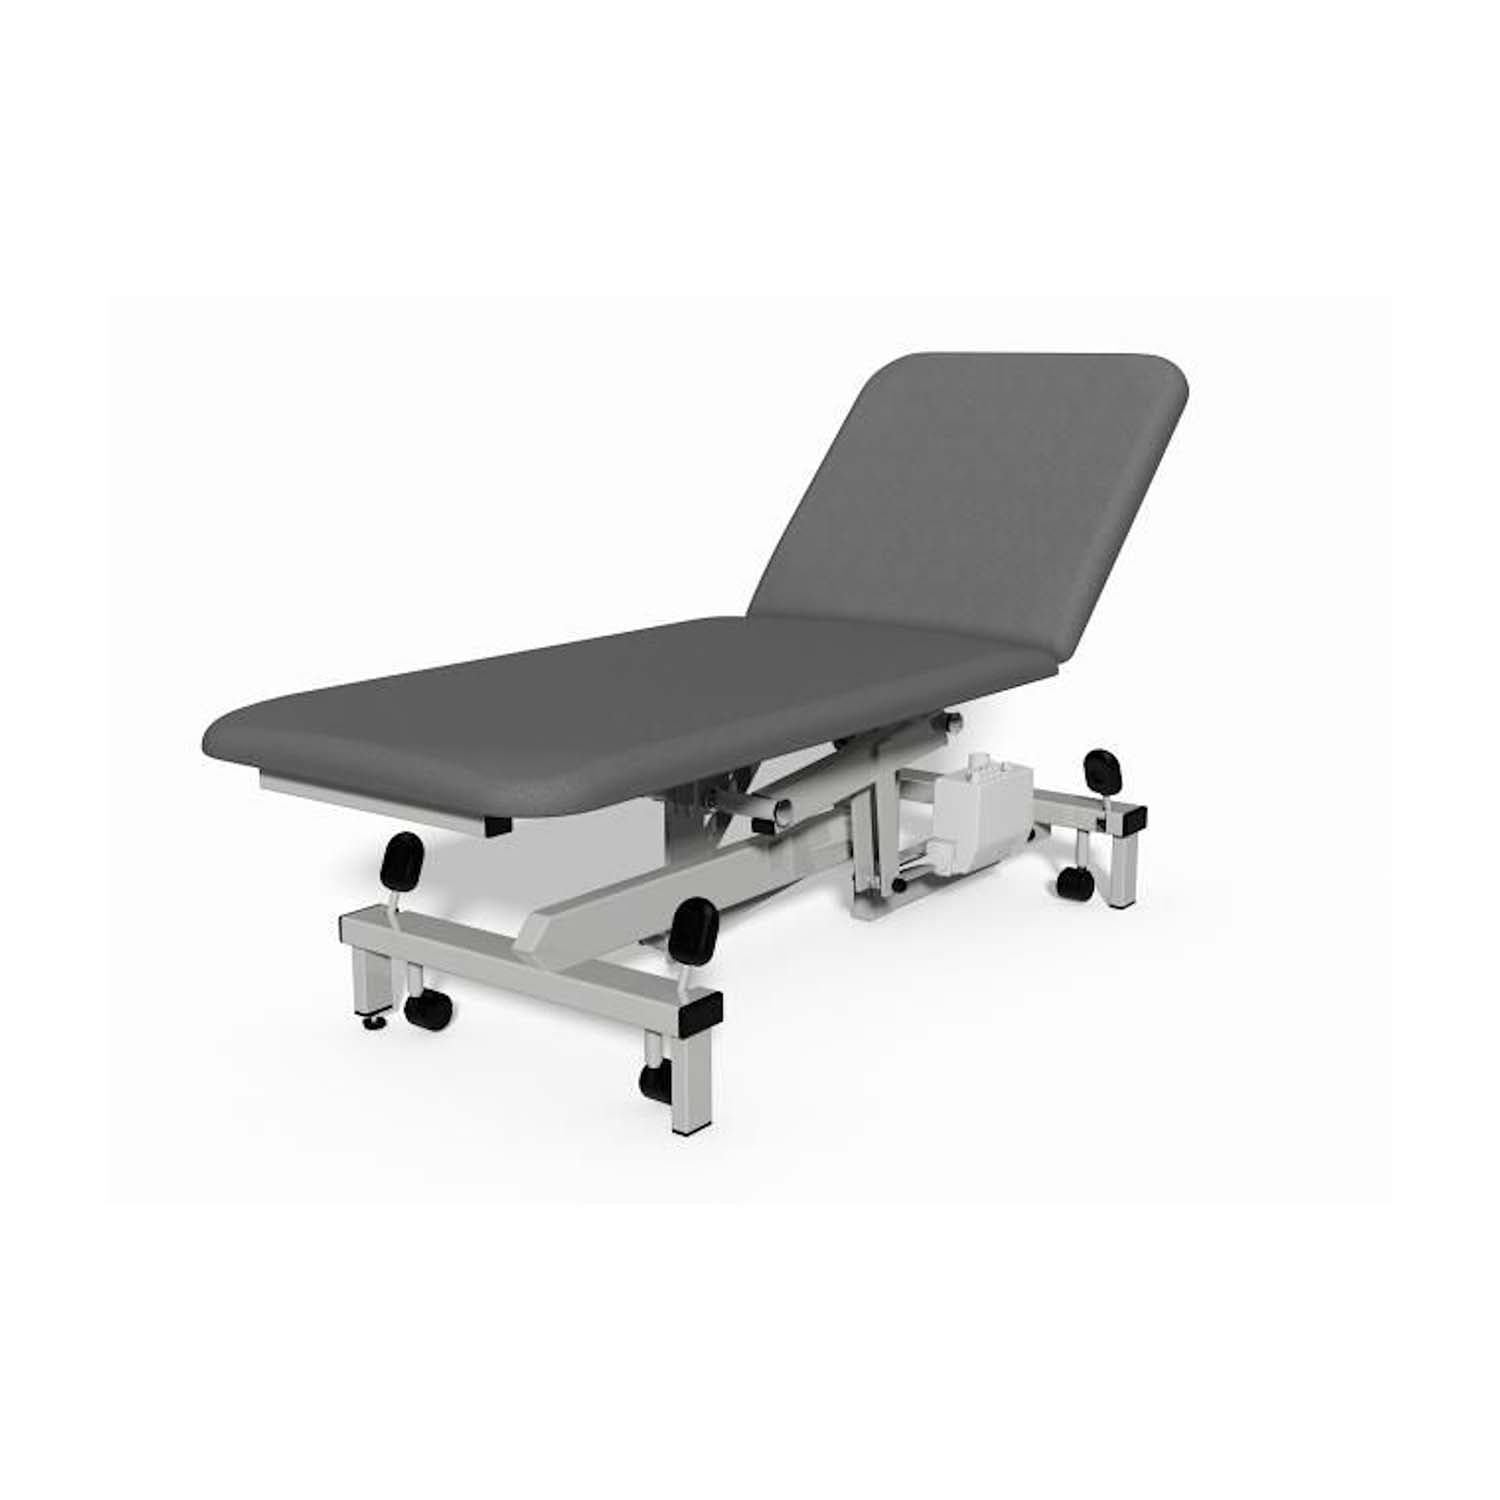 Plinth 2000 Model 502 Examination Couch | Electric | Battleship